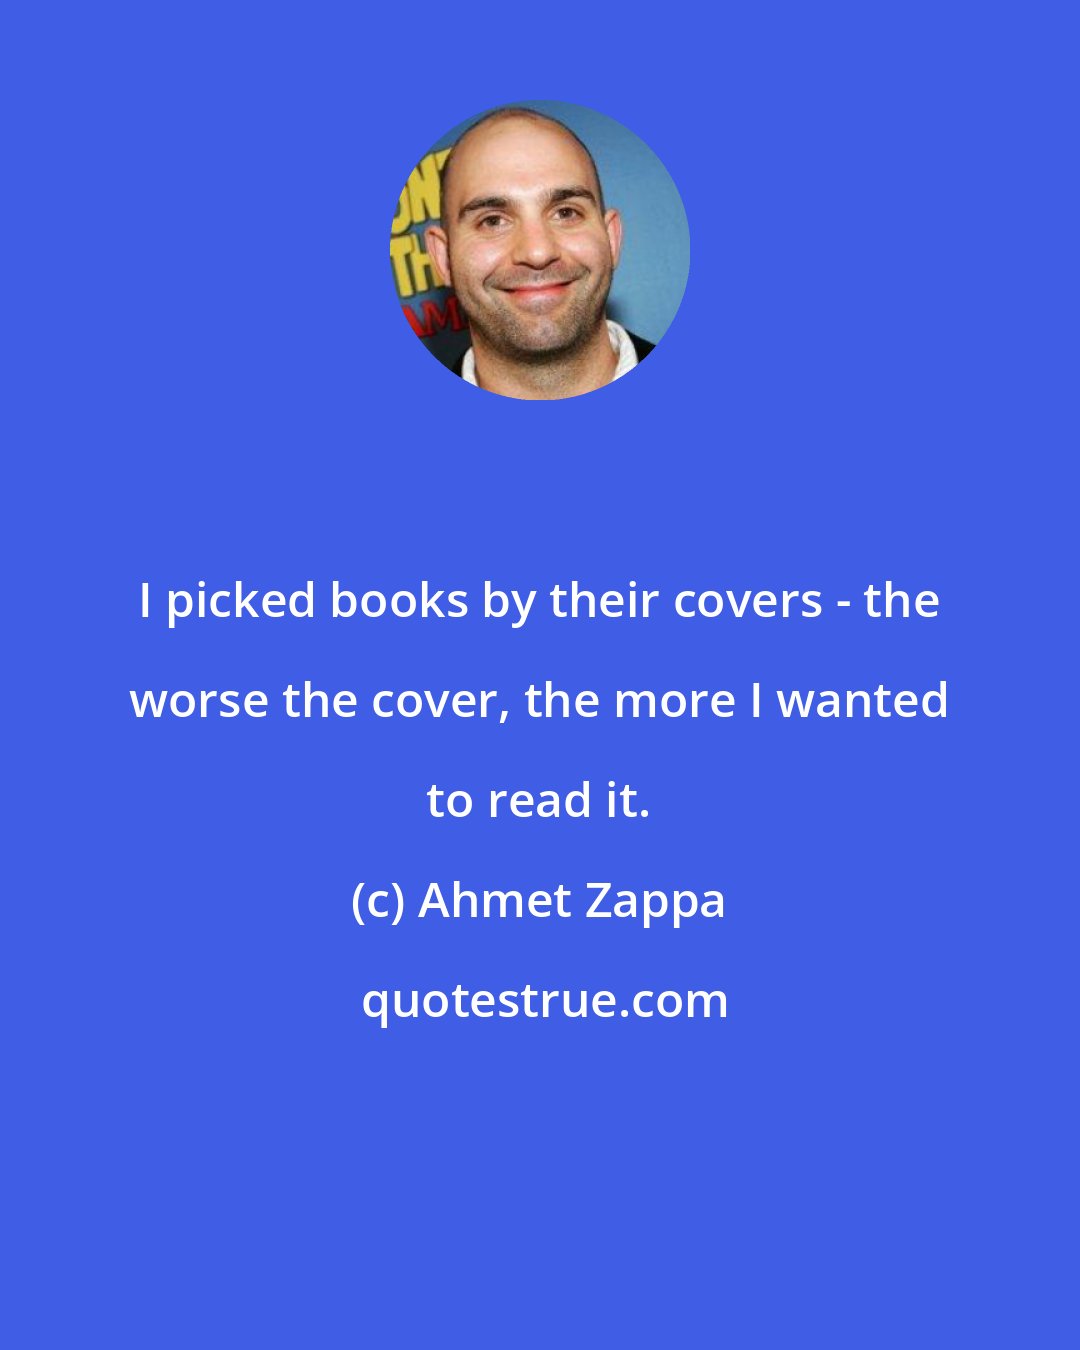 Ahmet Zappa: I picked books by their covers - the worse the cover, the more I wanted to read it.